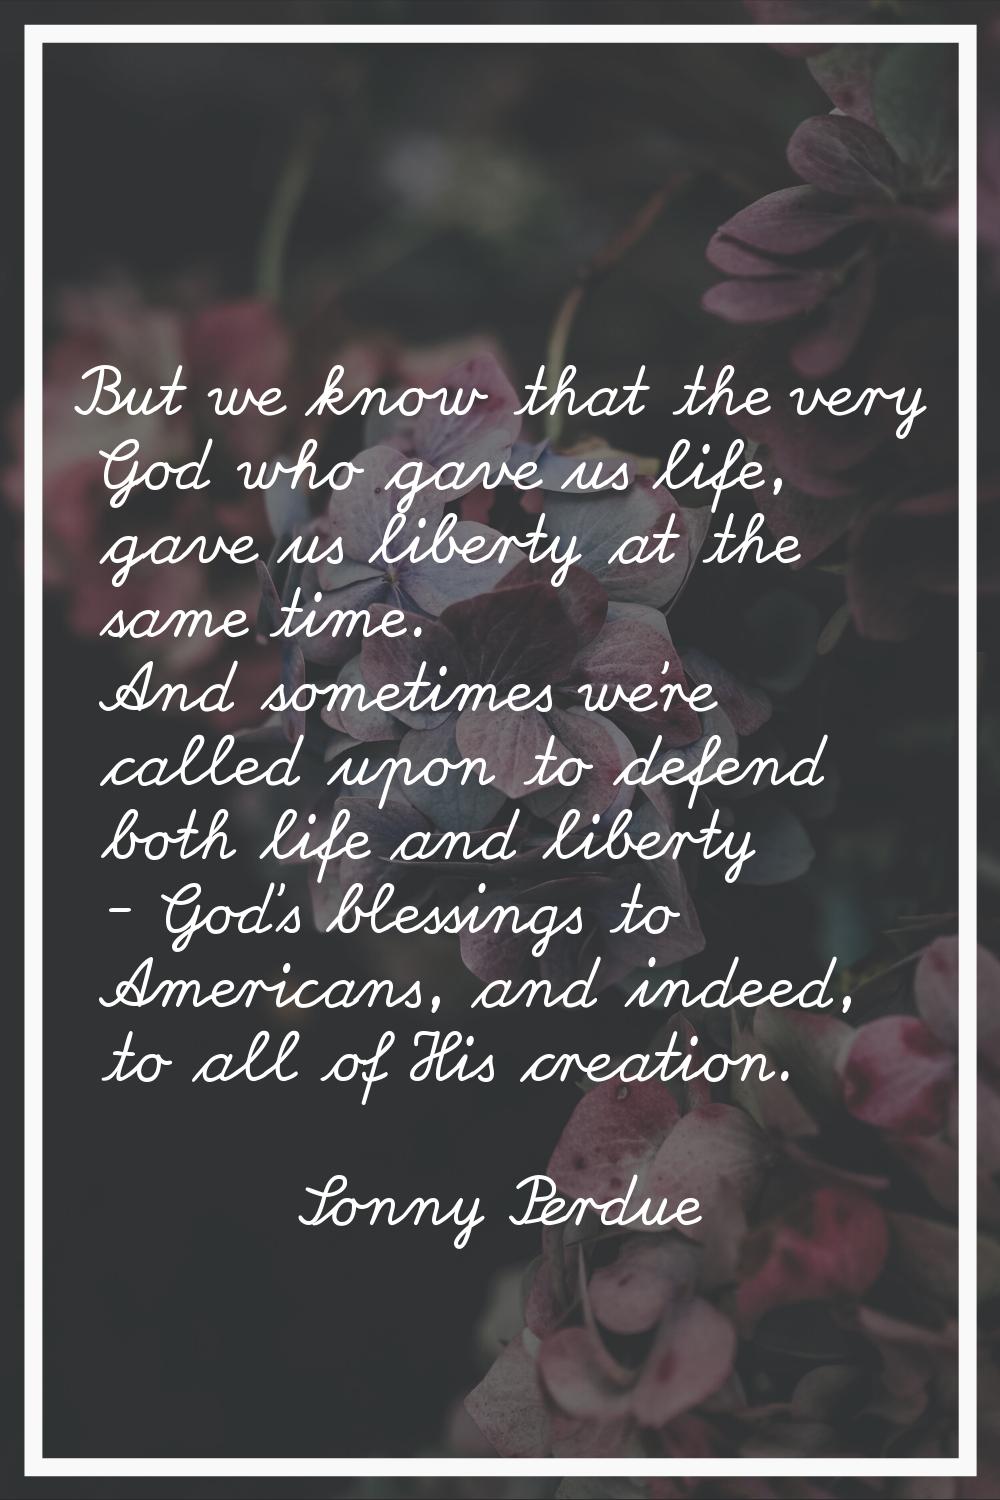 But we know that the very God who gave us life, gave us liberty at the same time. And sometimes we'